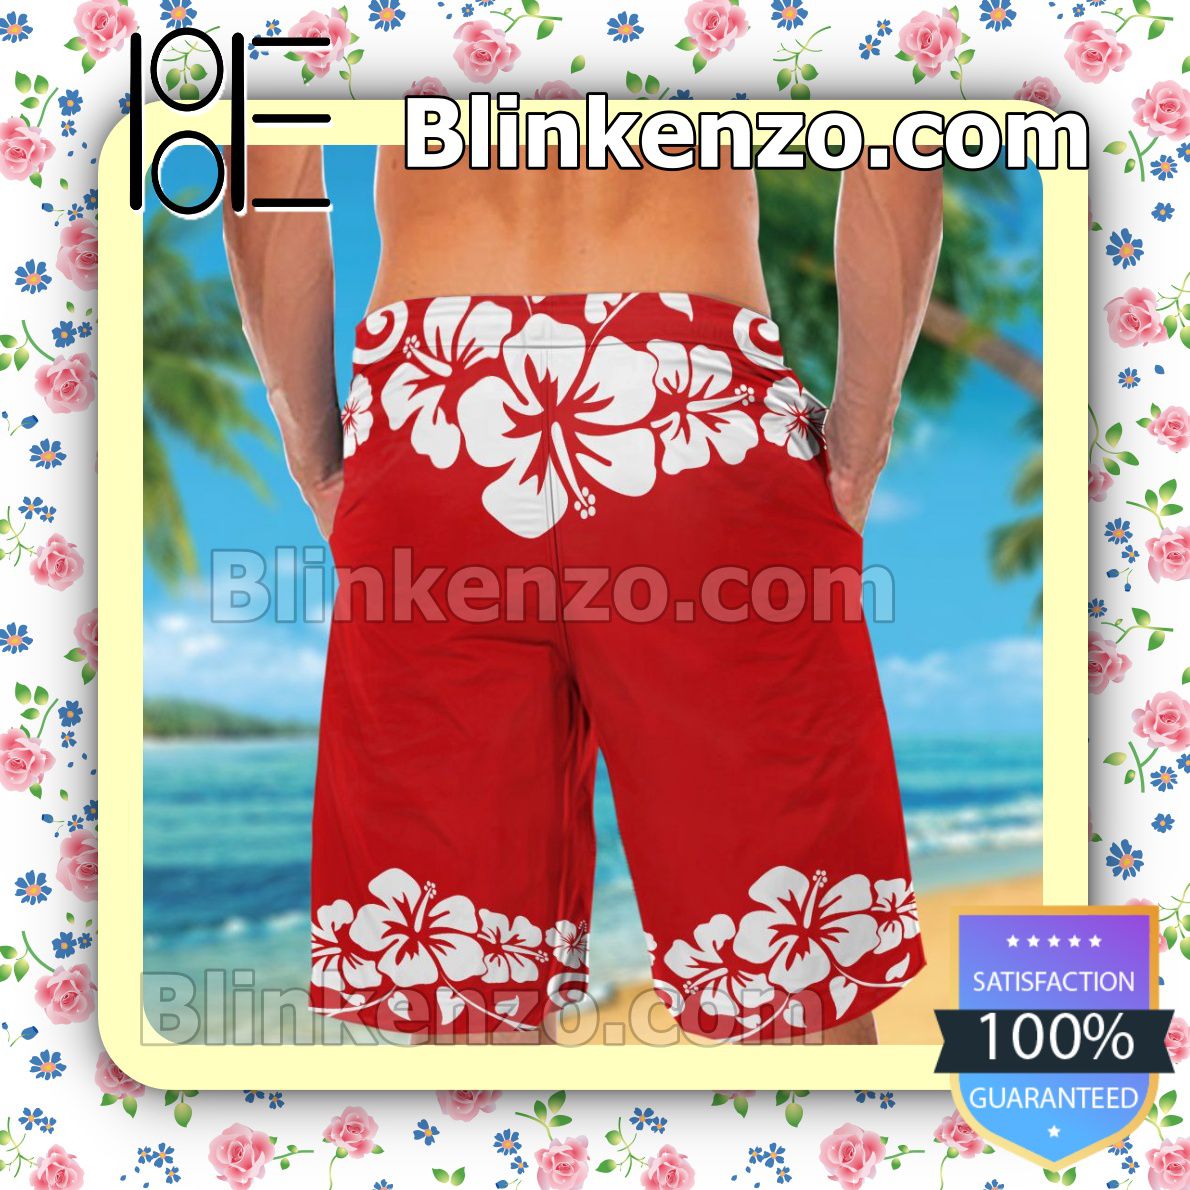 Only For Fan Wisconsin Badgers & Mickey Mouse Mens Shirt, Swim Trunk